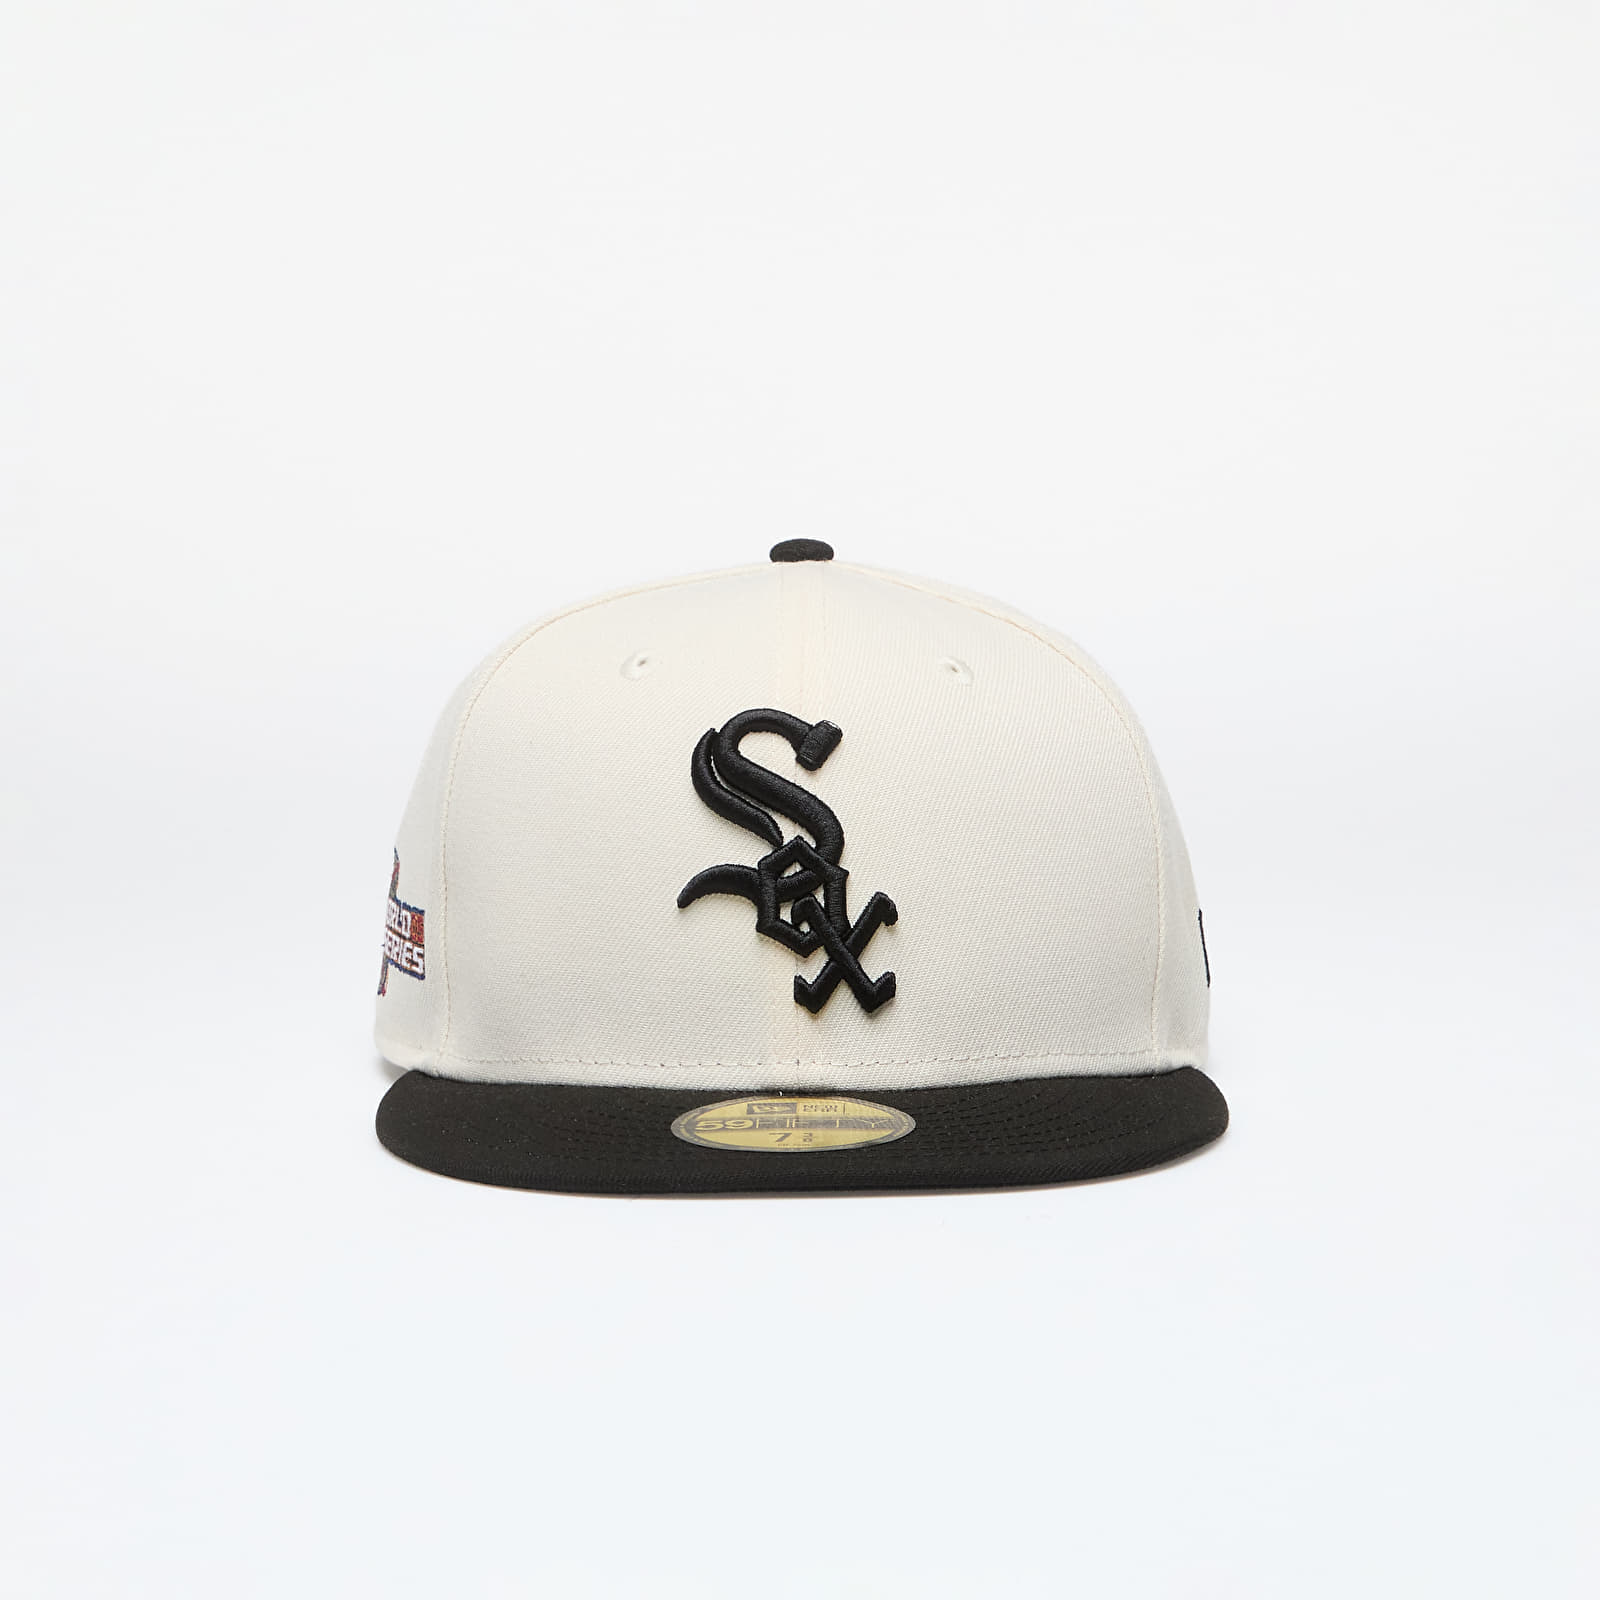 New Era Chicago White Sox 59Fifty Fitted Cap Light Cream/ Black